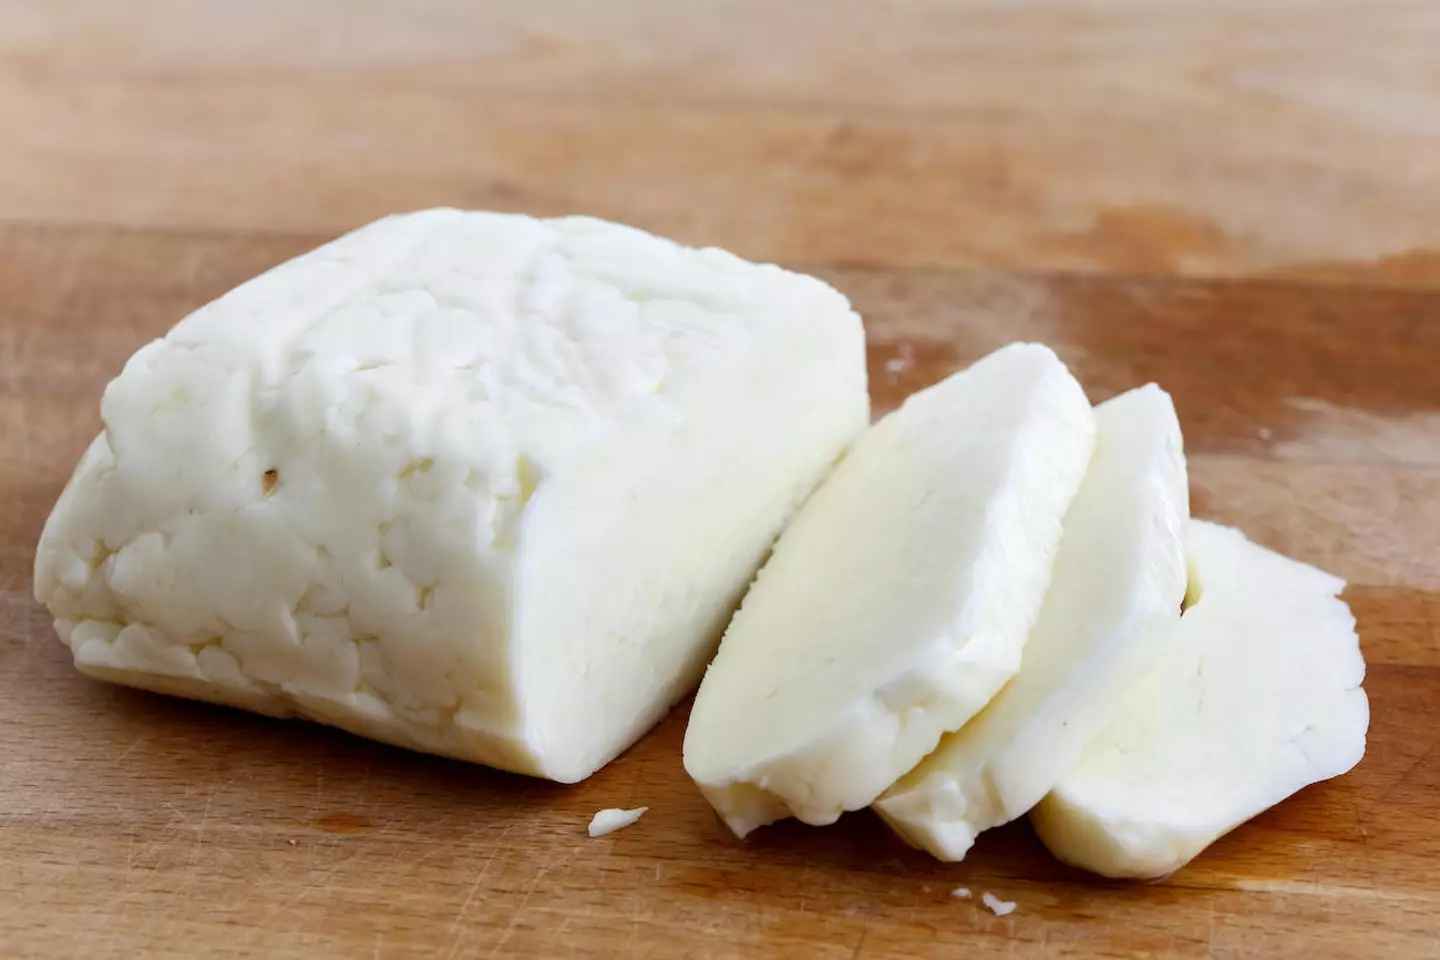 Halloumi is a semi-hard cheese made from sheep's milk and preserved in brine.